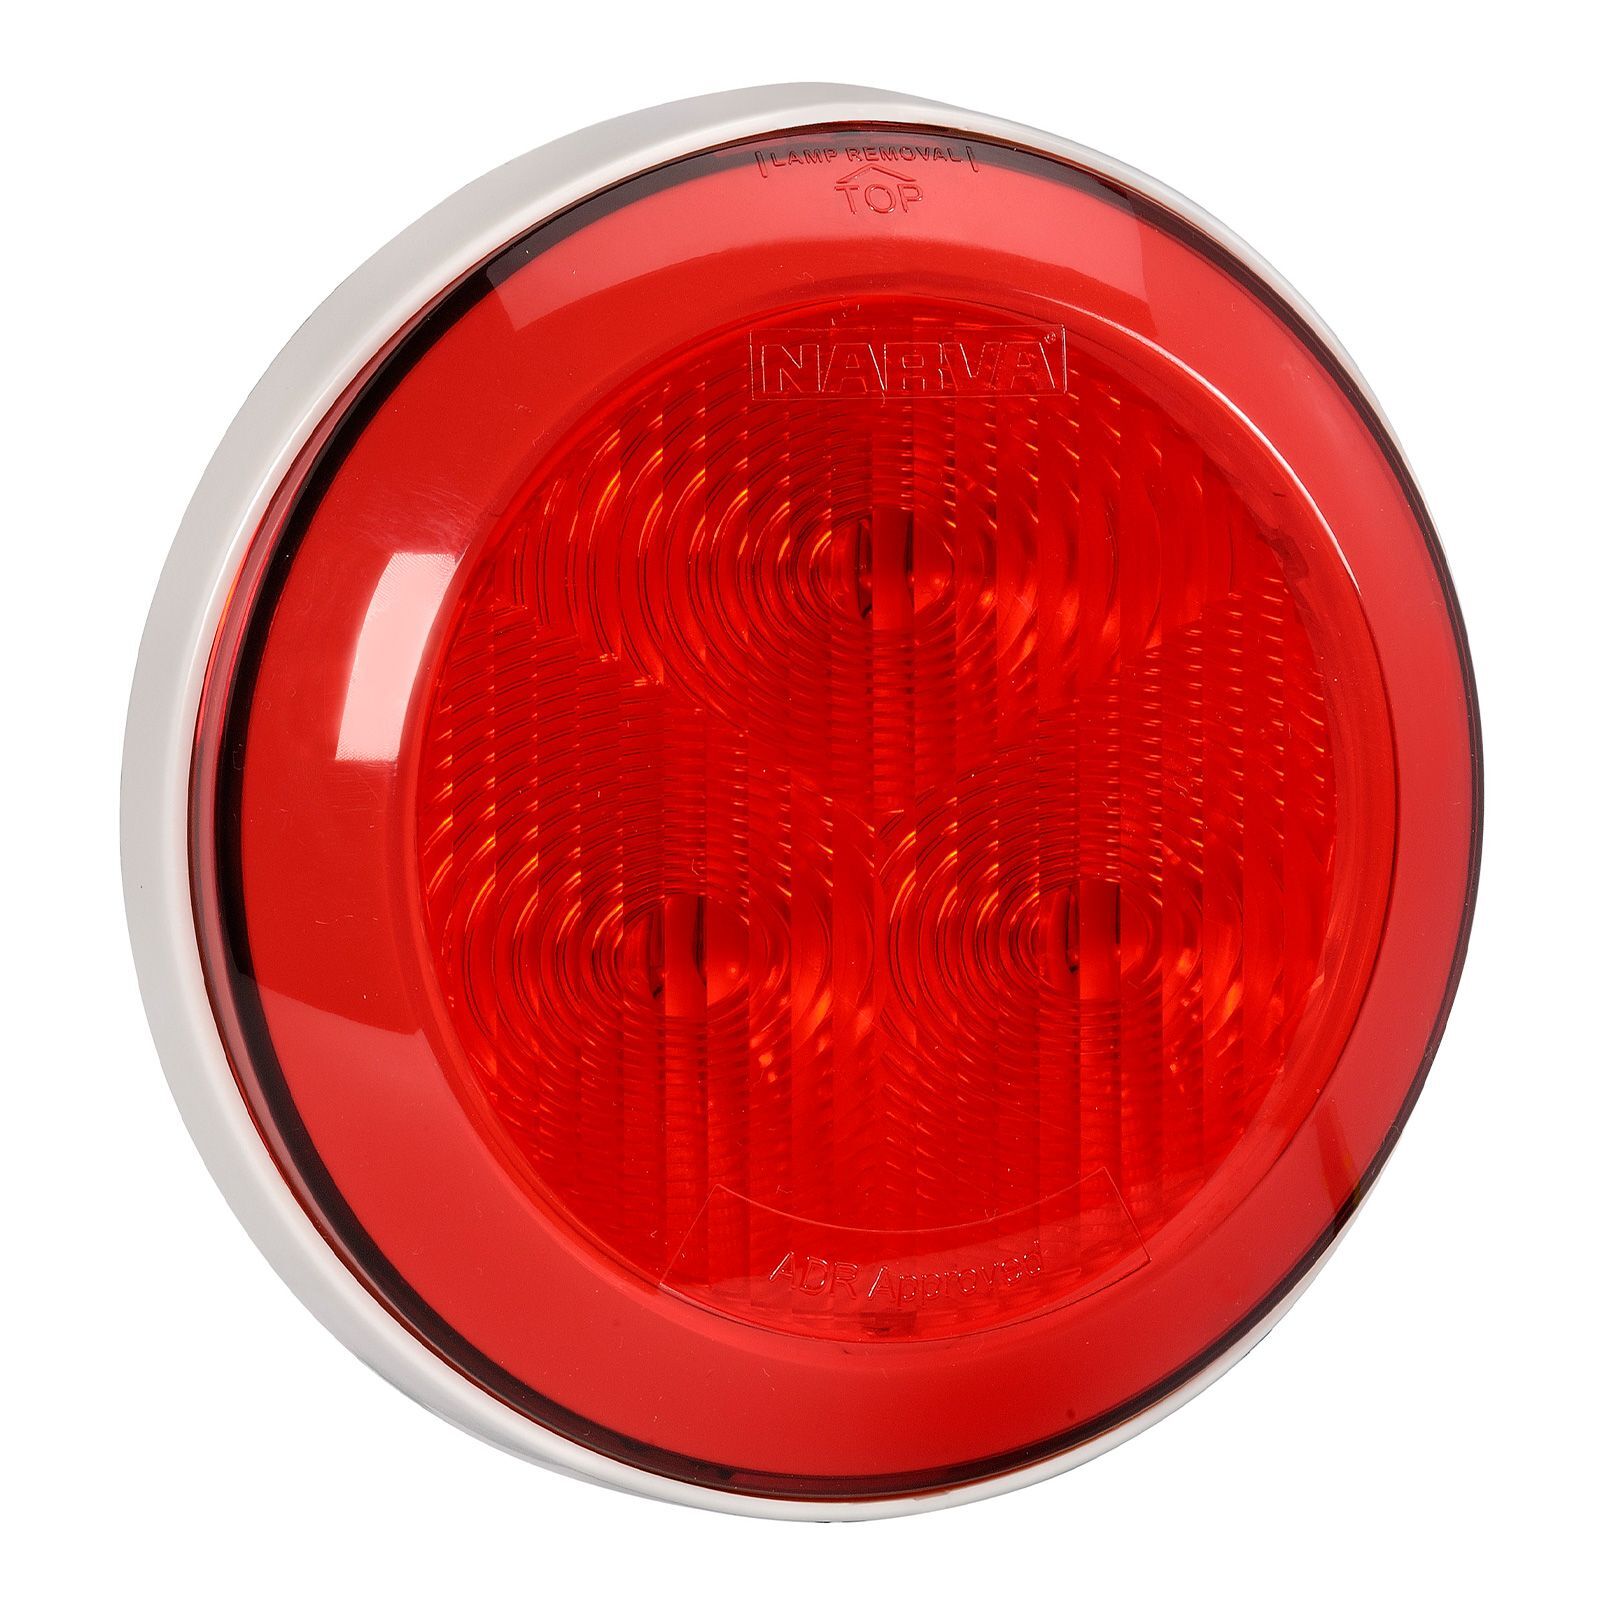 12 VOLT MODEL 43 LED REAR STOP/TAIL LAMP (RED)